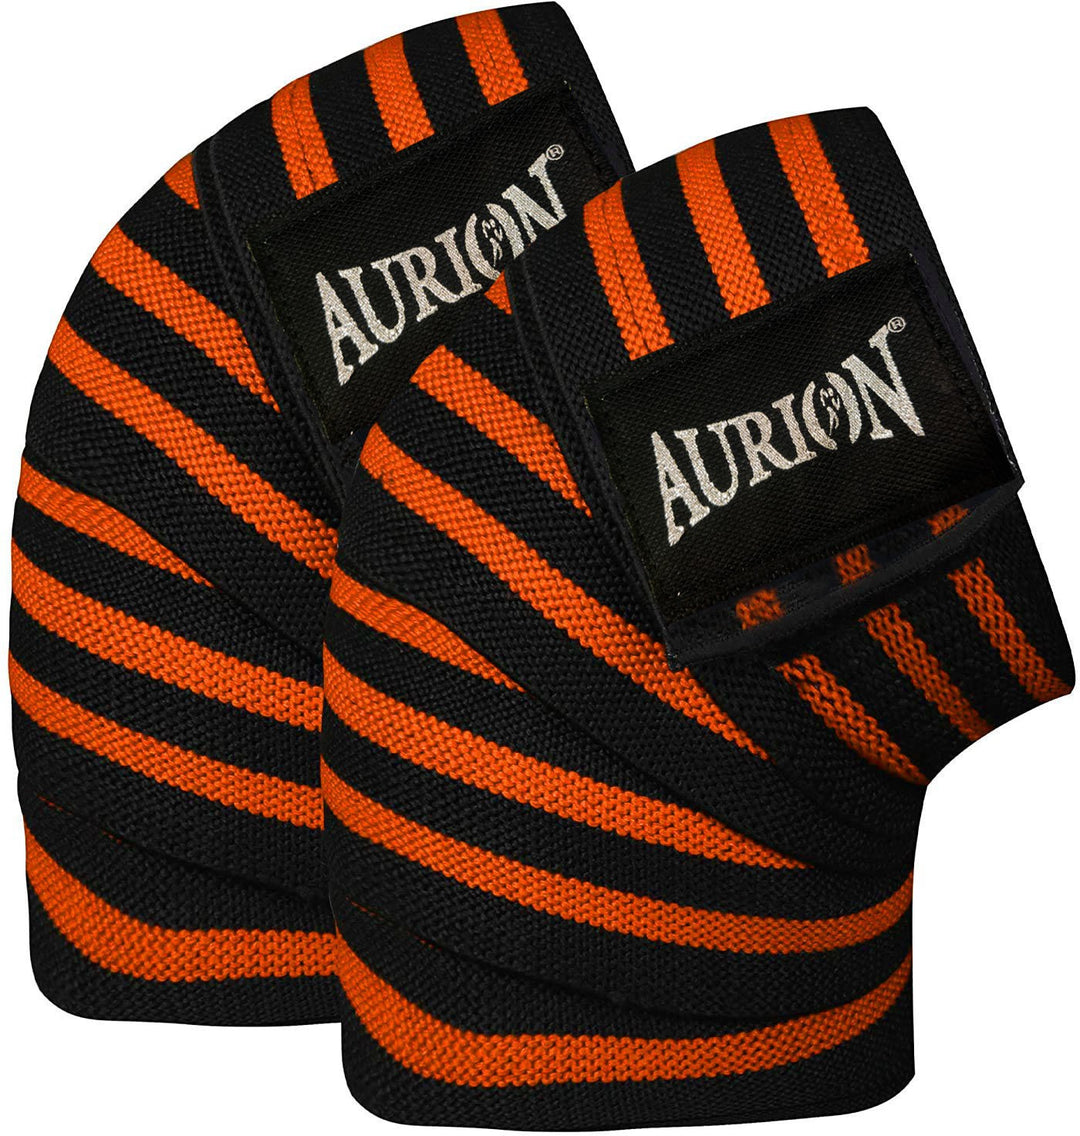 Aurion by 10Club Knee Wraps - 1Pair (Orange-Black 78 Inches | 199 cm) | Cross Training Gym Workout Weightlifting | Knee Straps for Squats | for Men & Women | 78"-Compression and Elastic Support | Weightlifting